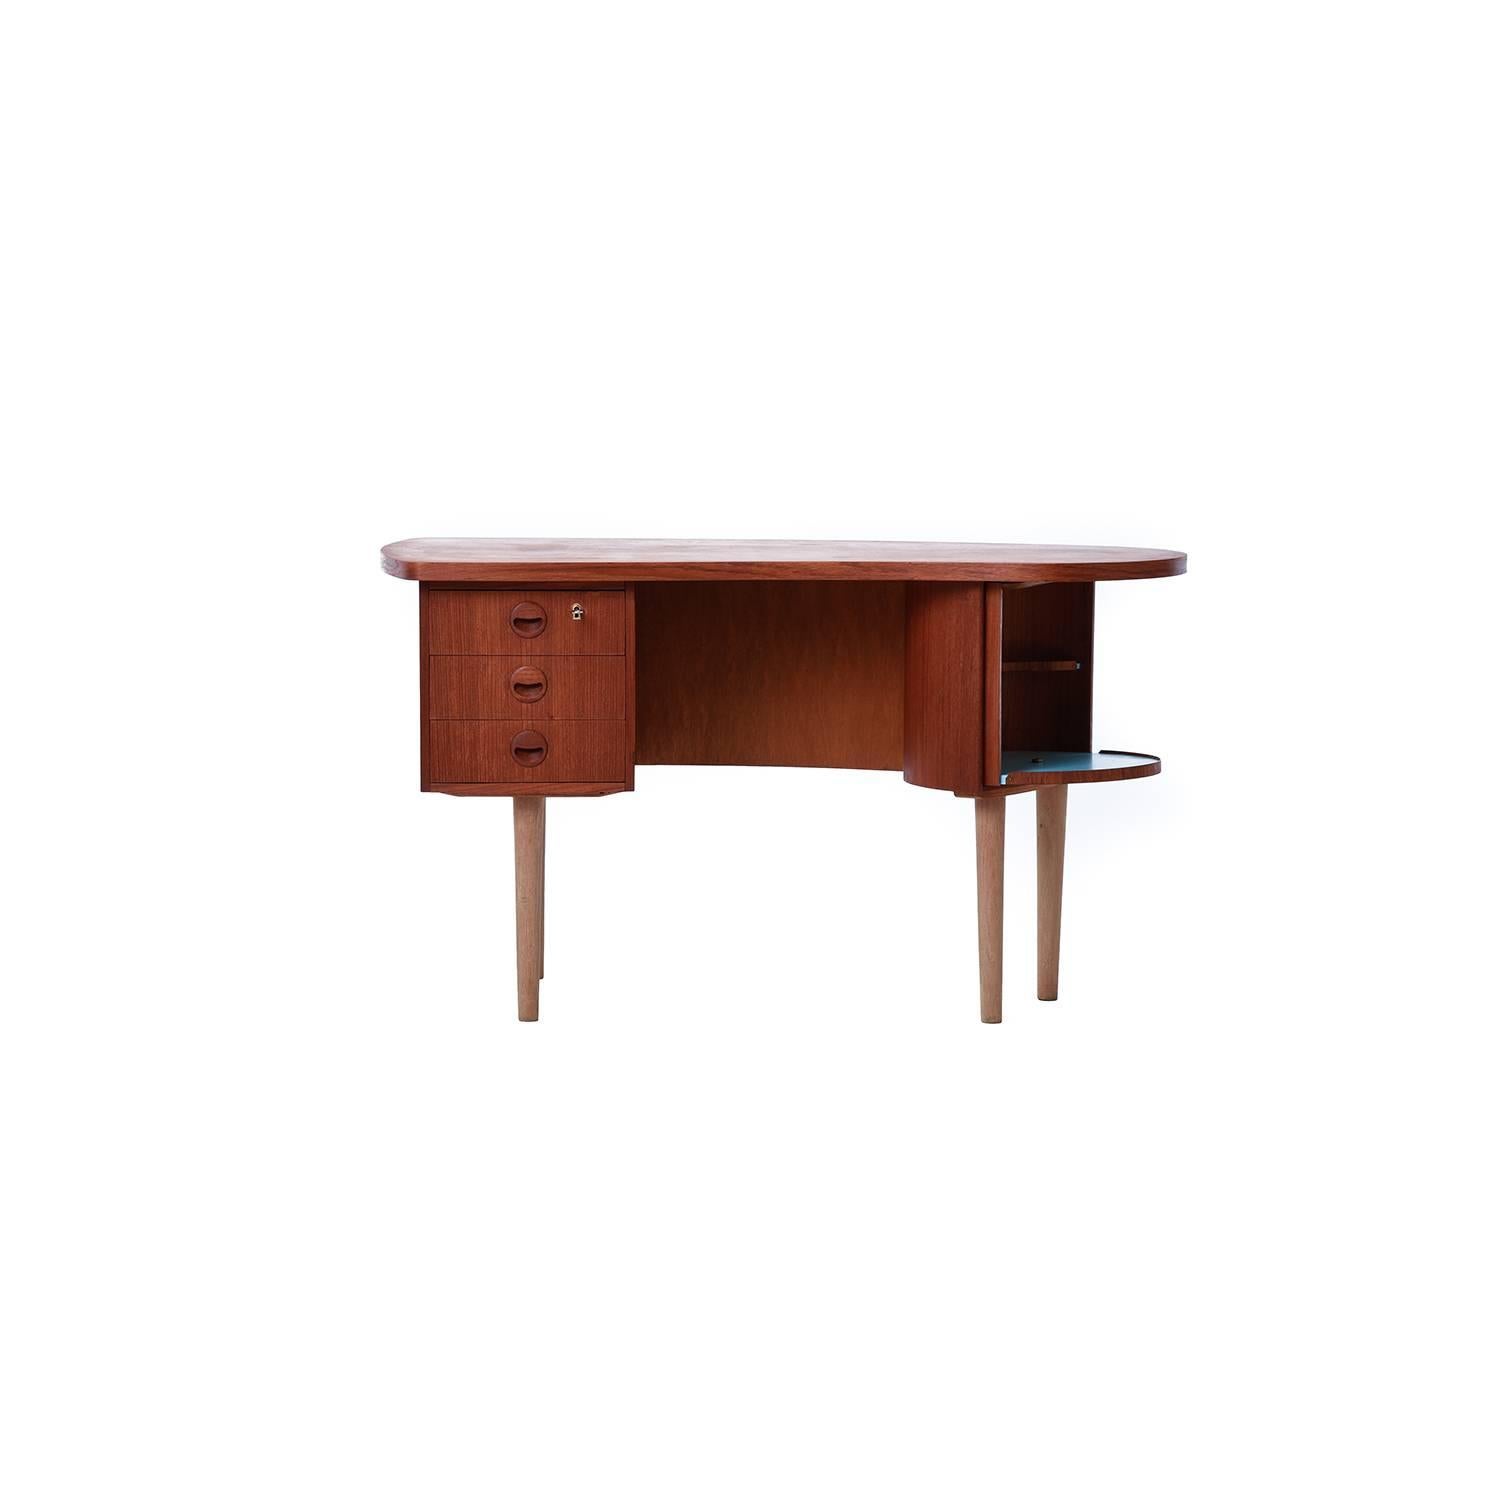 This petit kidney shaped teak desk with oak legs packs a punch with multiple storage options: three drawers, a lockable compartment, open back shelving, and a Lazy Susan bar with eggshell blue accent.